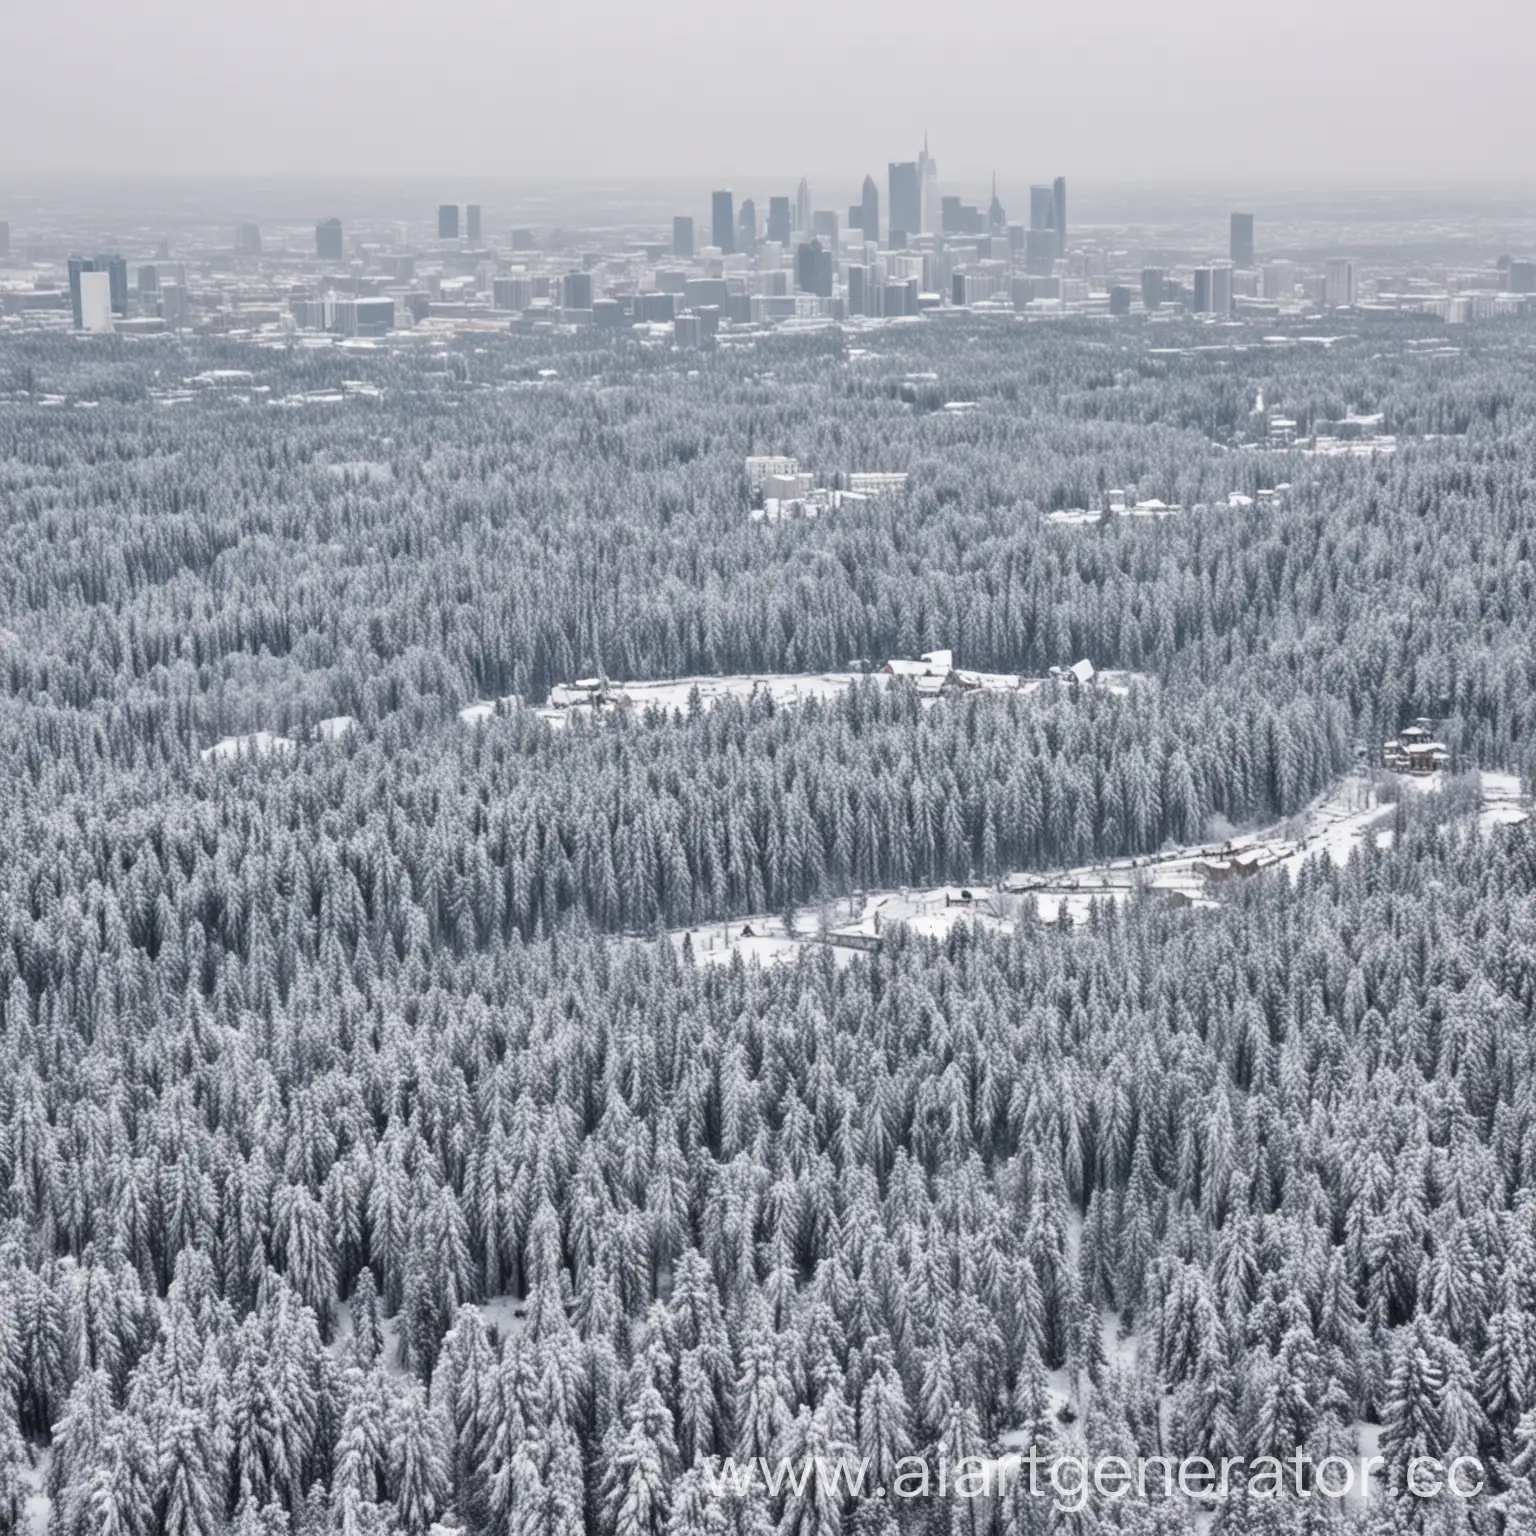 Winter-Wonderland-Cityscape-with-Snow-and-Evergreen-Trees